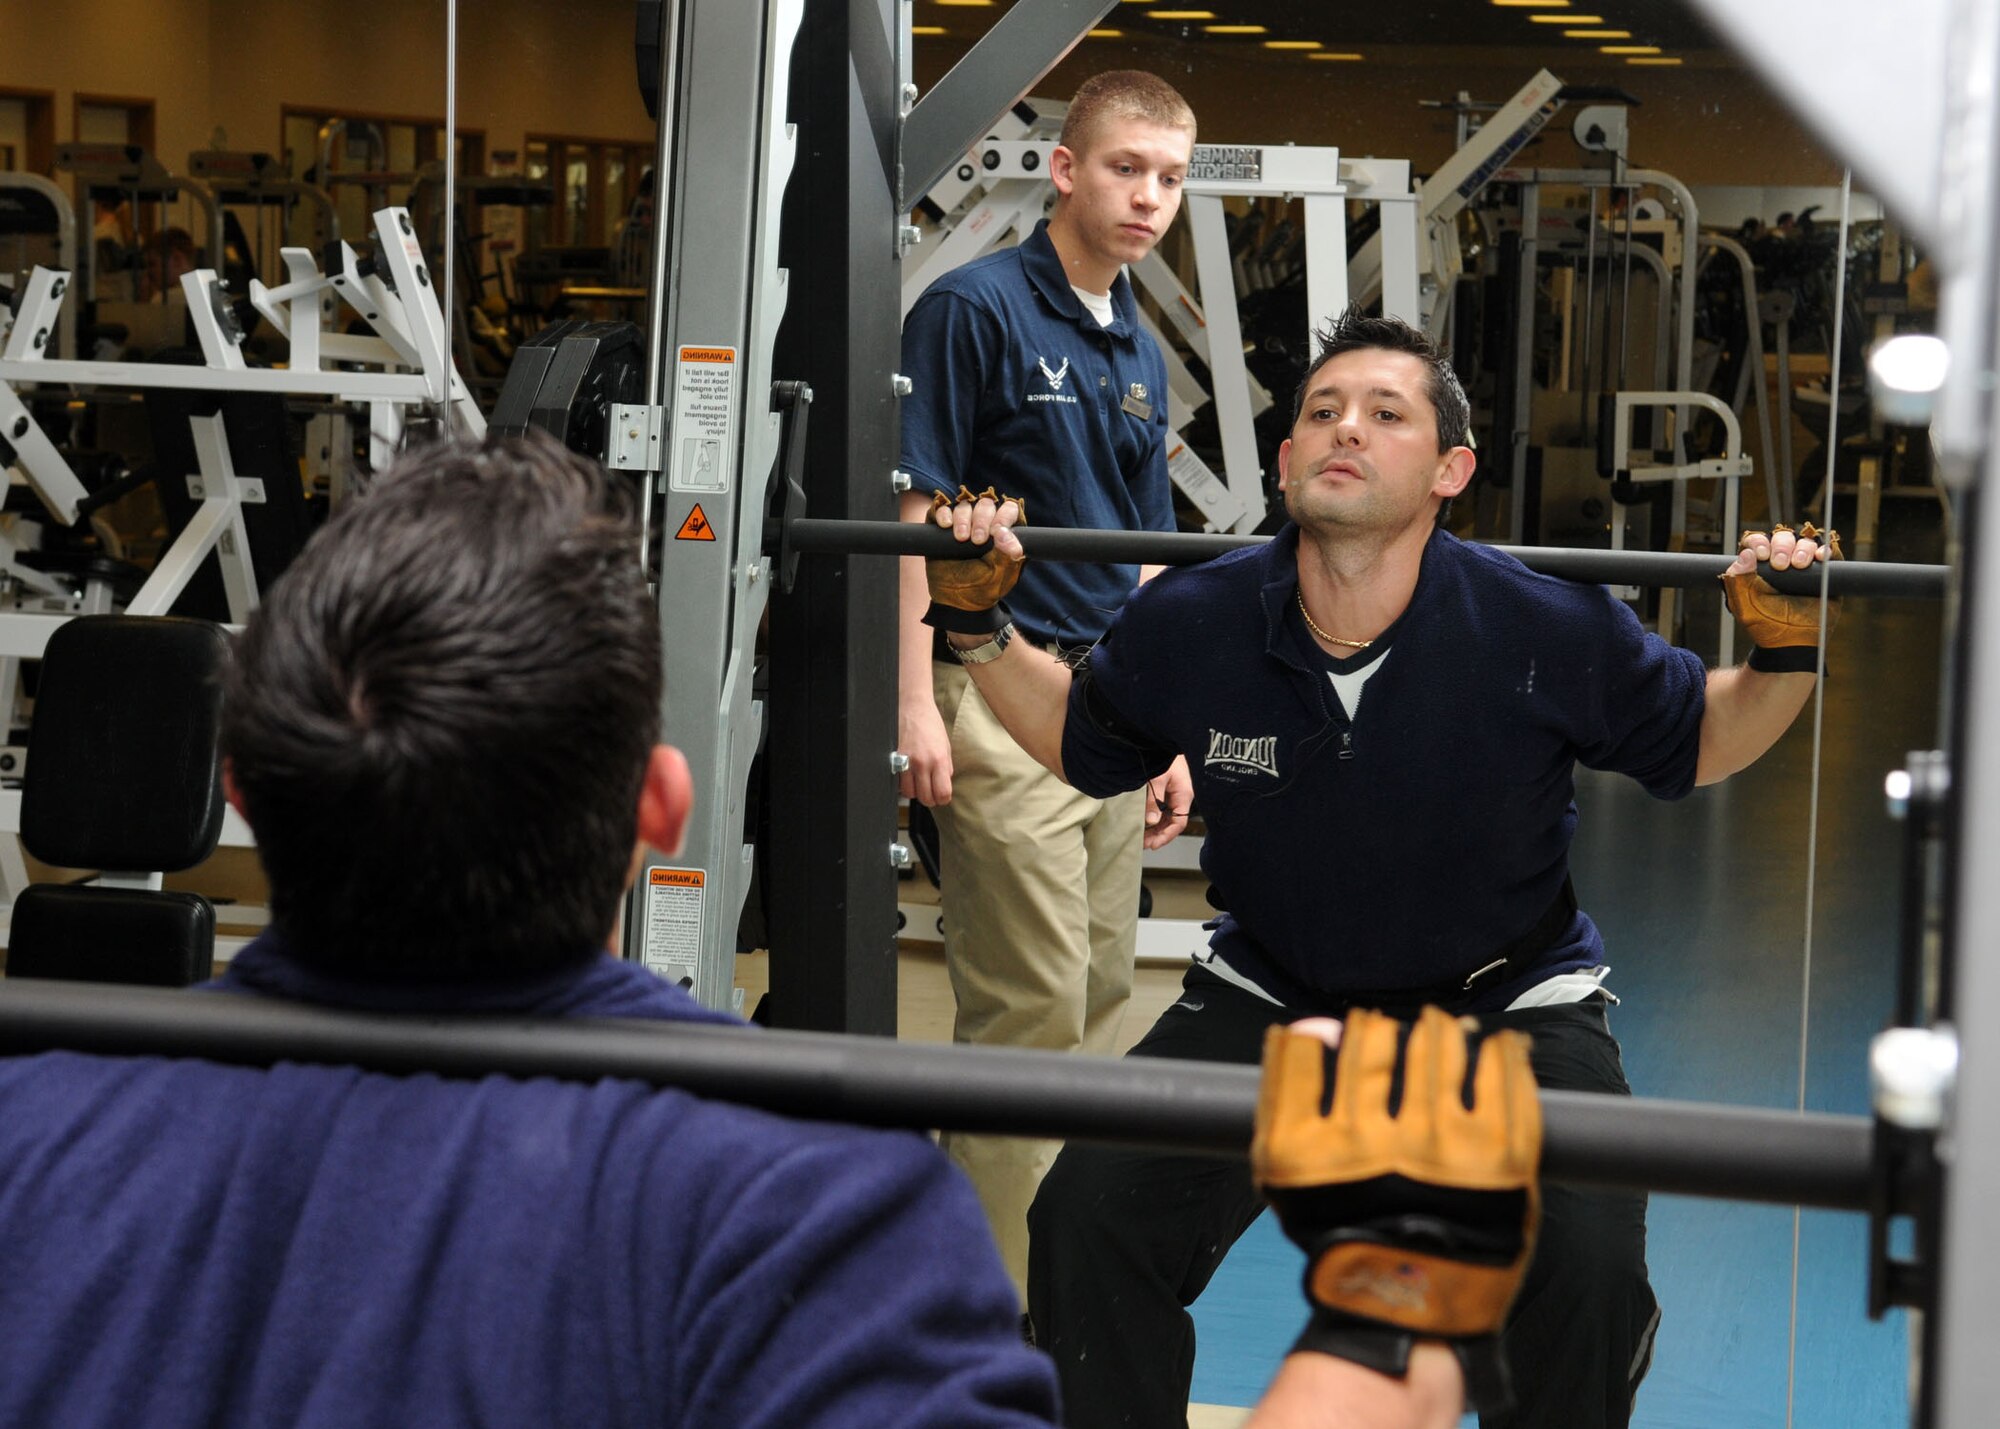 Airman 1st Class Corey Rollins, 100th Force Support Squadron fitness specialist, ensures that Salvatore Grasso executes the proper squat technique during his workout at the Hardstand Gym April 1, 2009, at RAF Mildenhall, England. Airman Rollins is trained to observe and advise individuals of proper technique to avoid injury. (U.S. Air Force photo by Staff Sgt. Jerry Fleshman) 